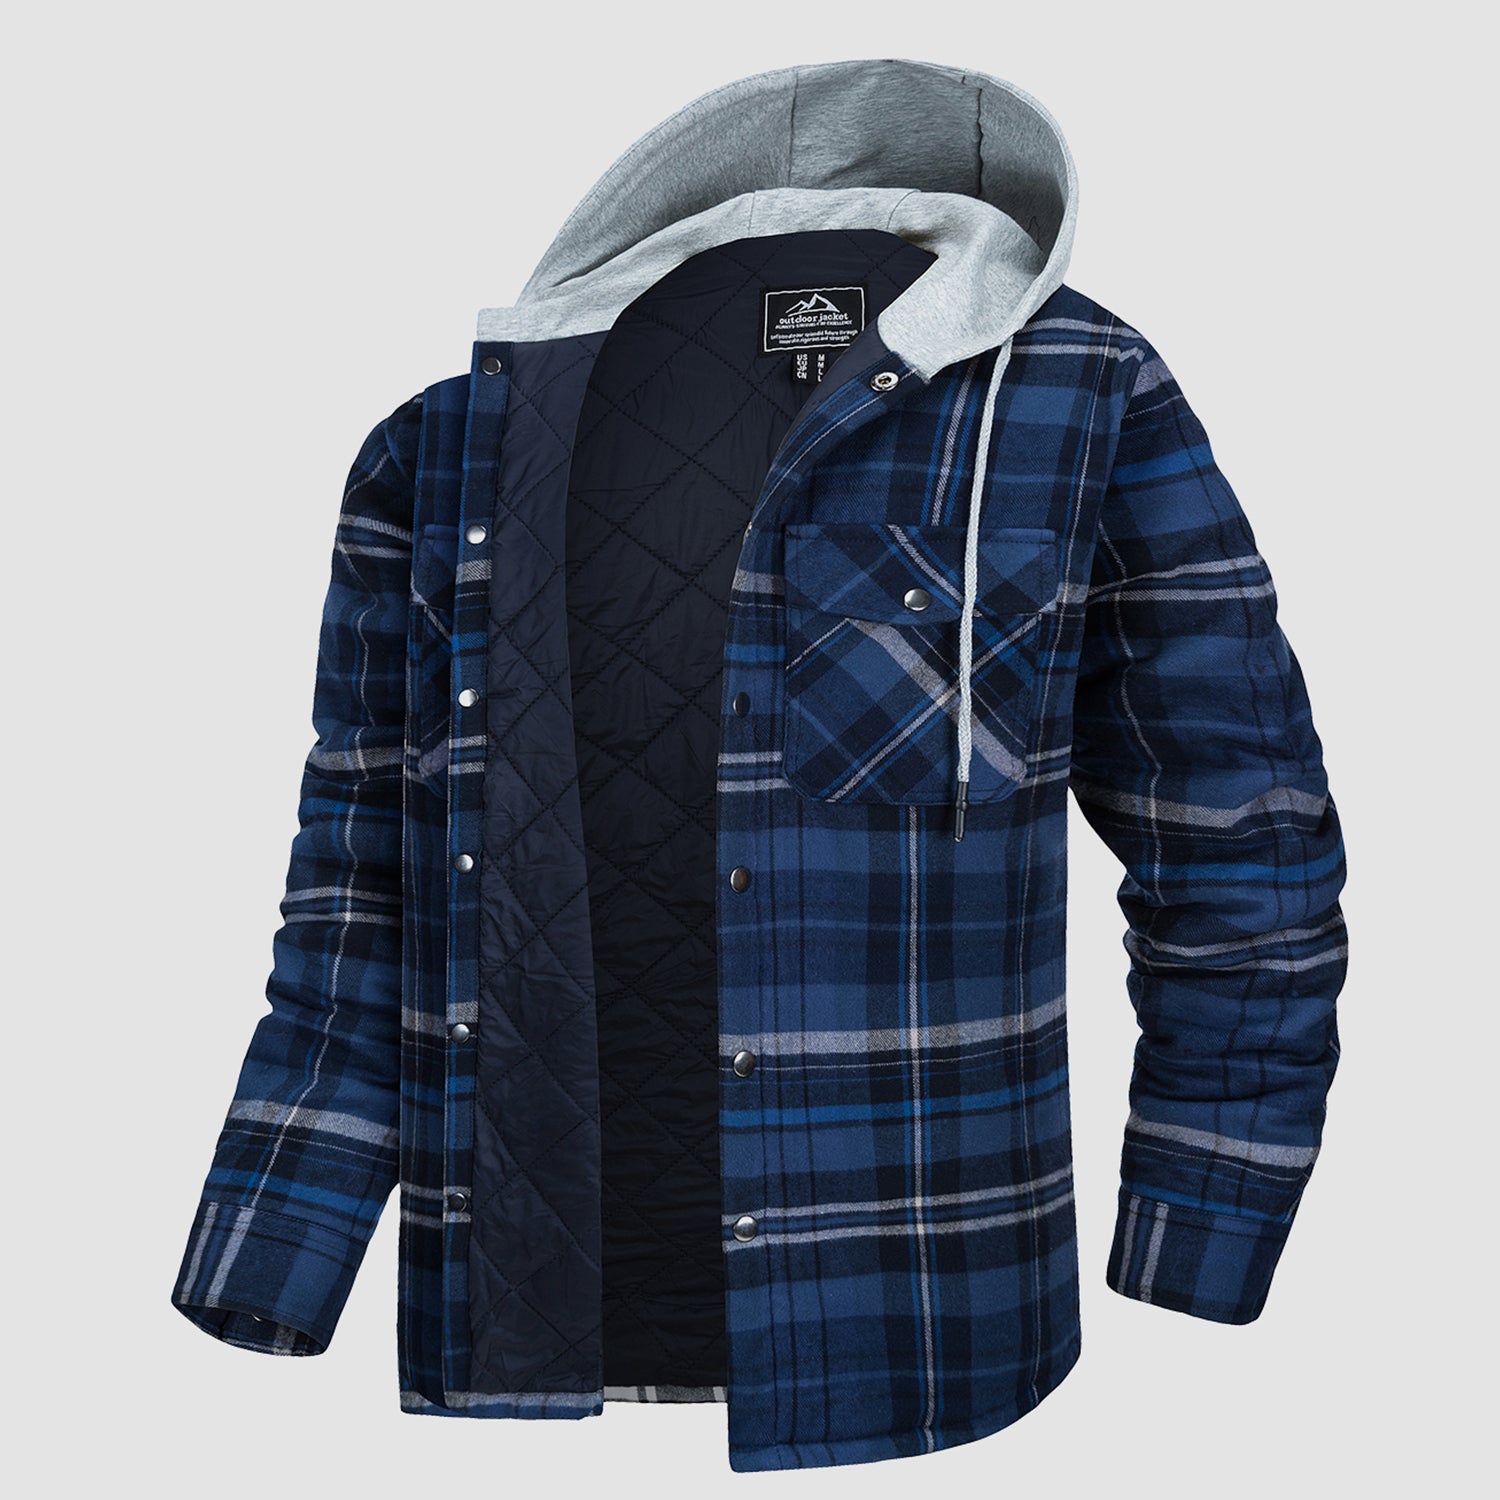 Men's Flannel Plaid Shirt Jacket with Hood Quilted Lined Coat